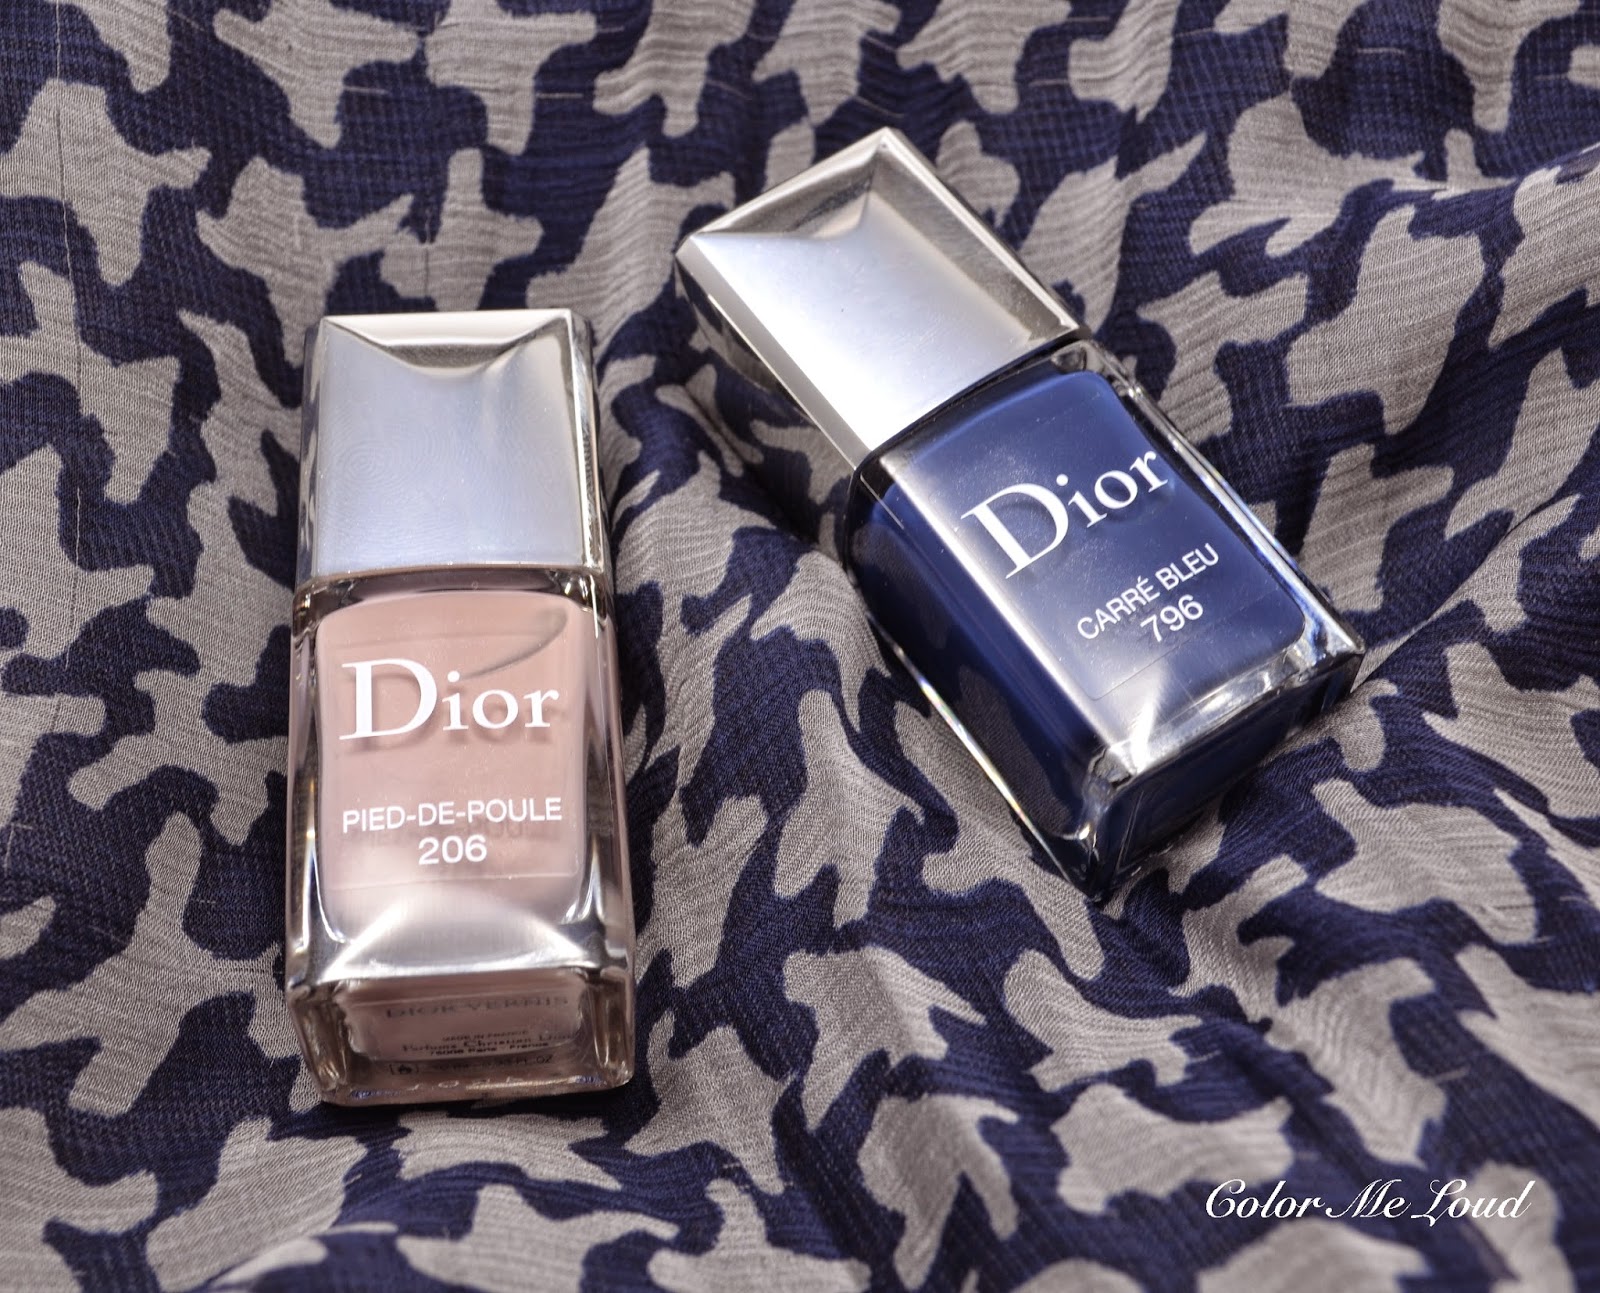 Dior Vernis #206 Pied-de-Poule, #796 Carre Bleu and #853 Massai from Fall/Winter 2014 Make-up Collection, Review, Swatch & Comparison